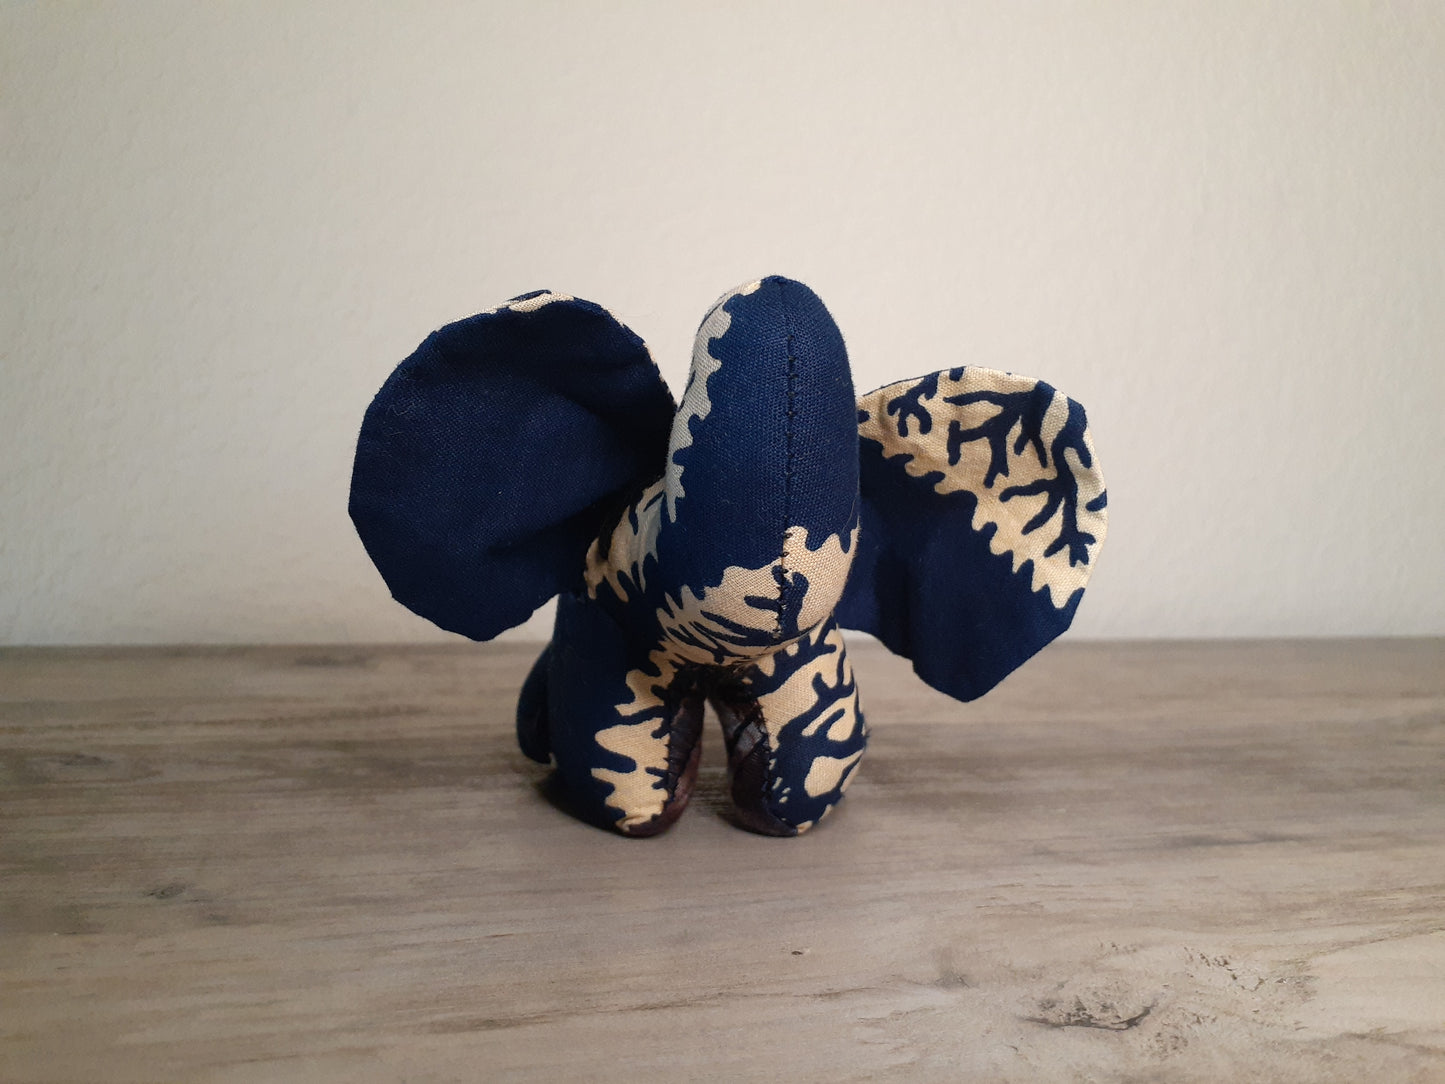 Small Stuffed Elephant Toy made from African Fabric